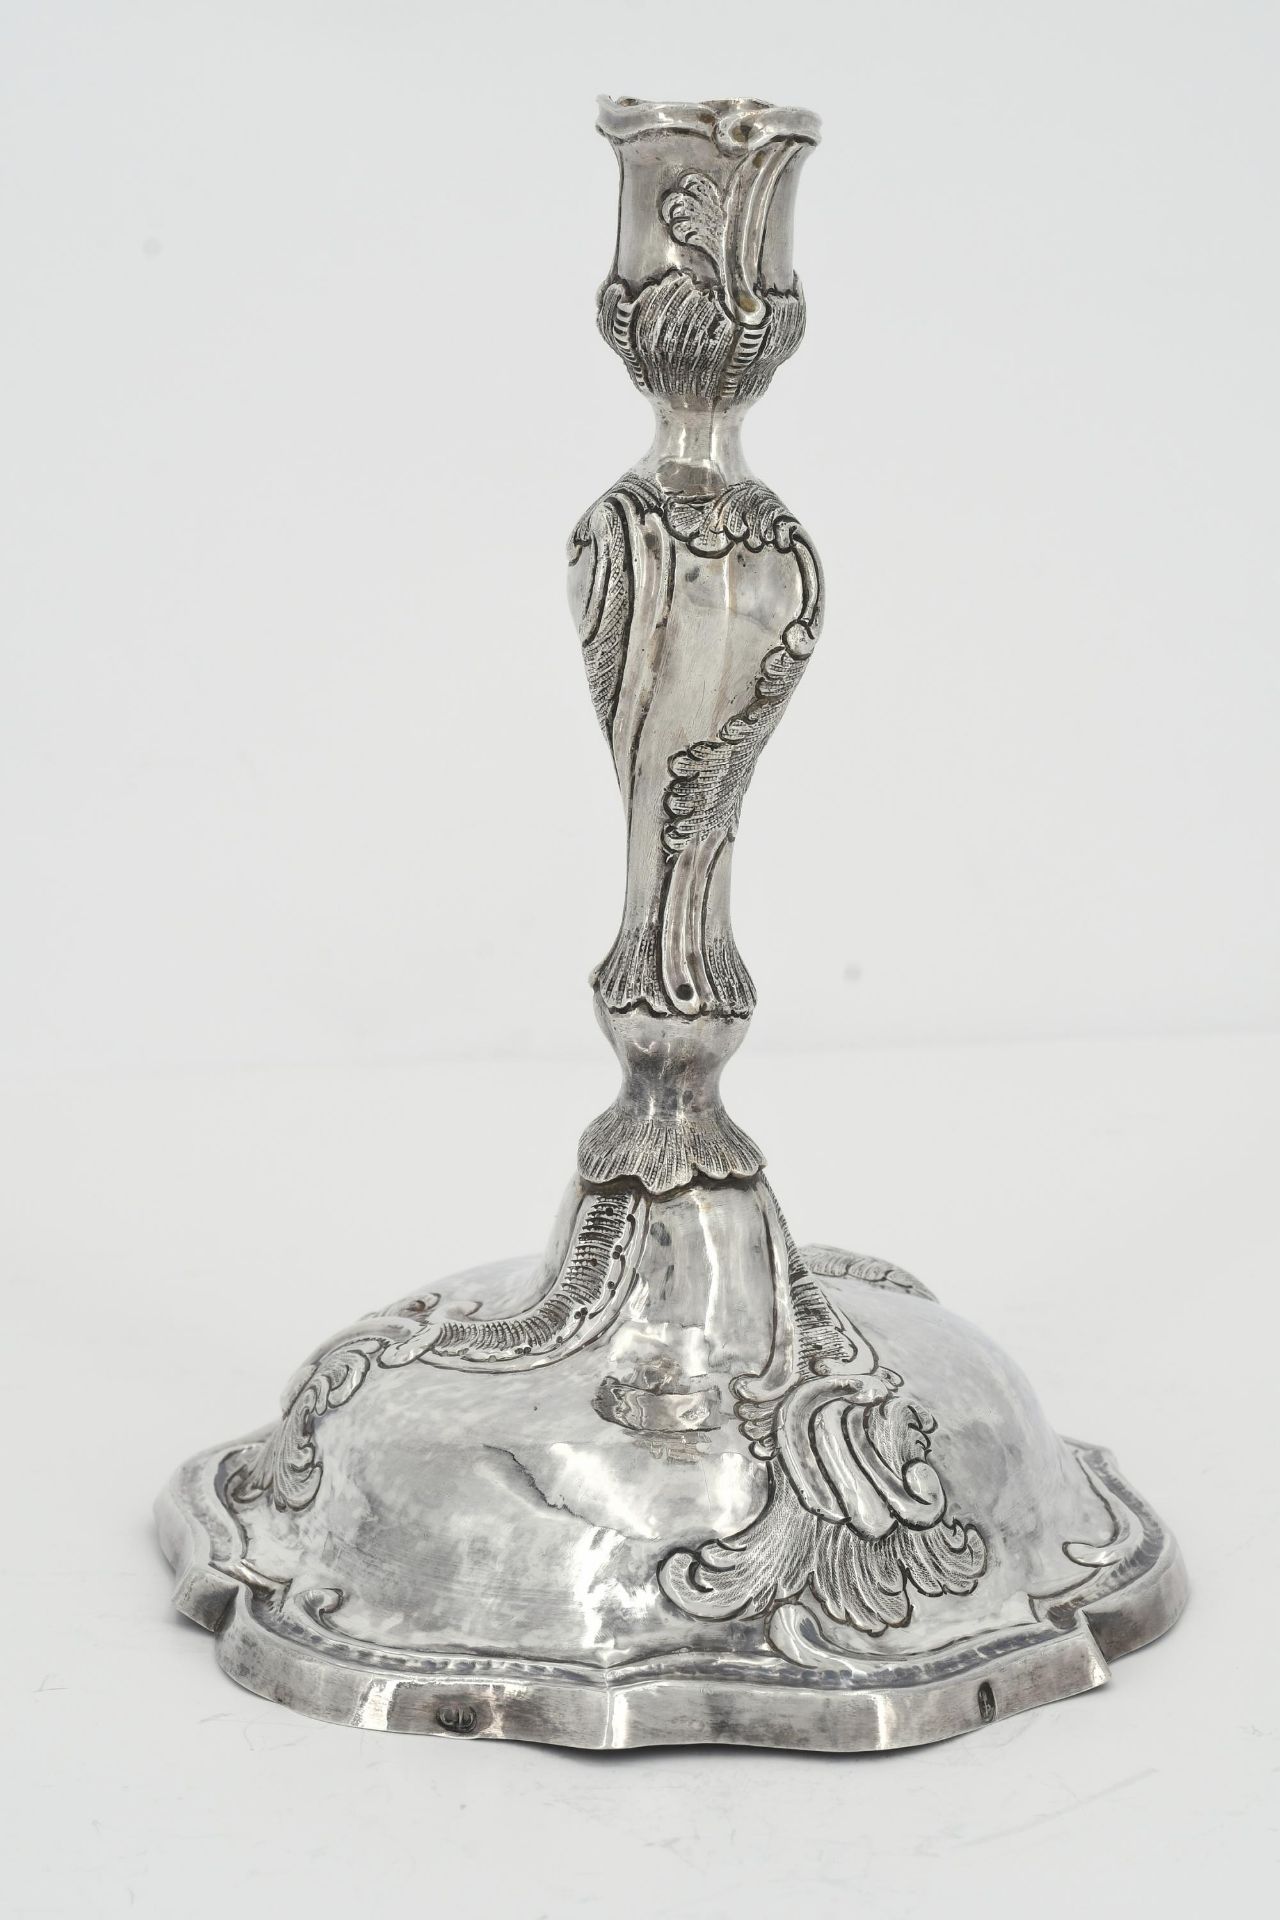 Rococo silver candlestick - Image 4 of 7